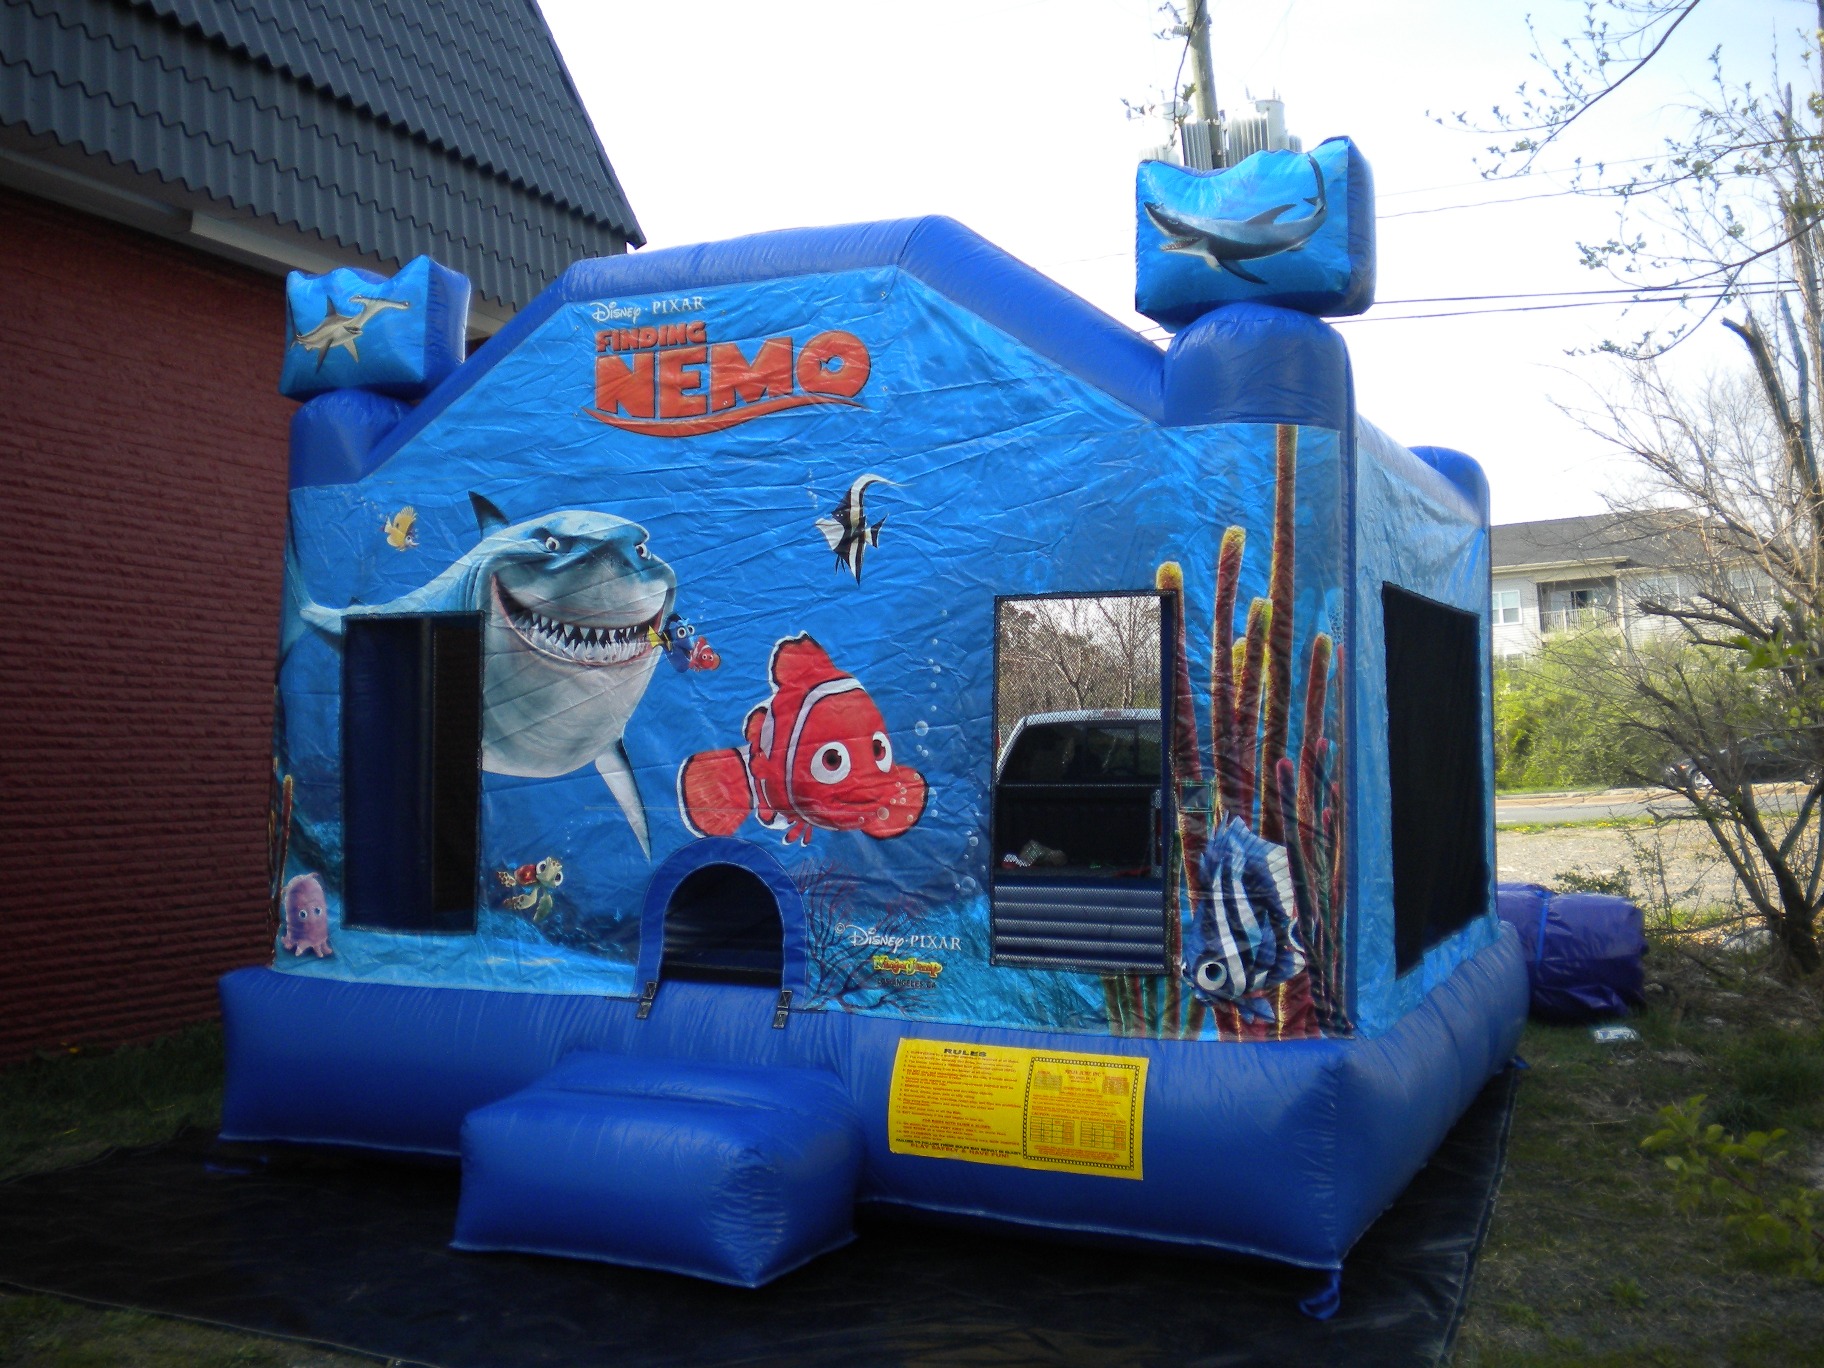 Finding Nemo Jumper Moonbouce Bounce House Front Right View